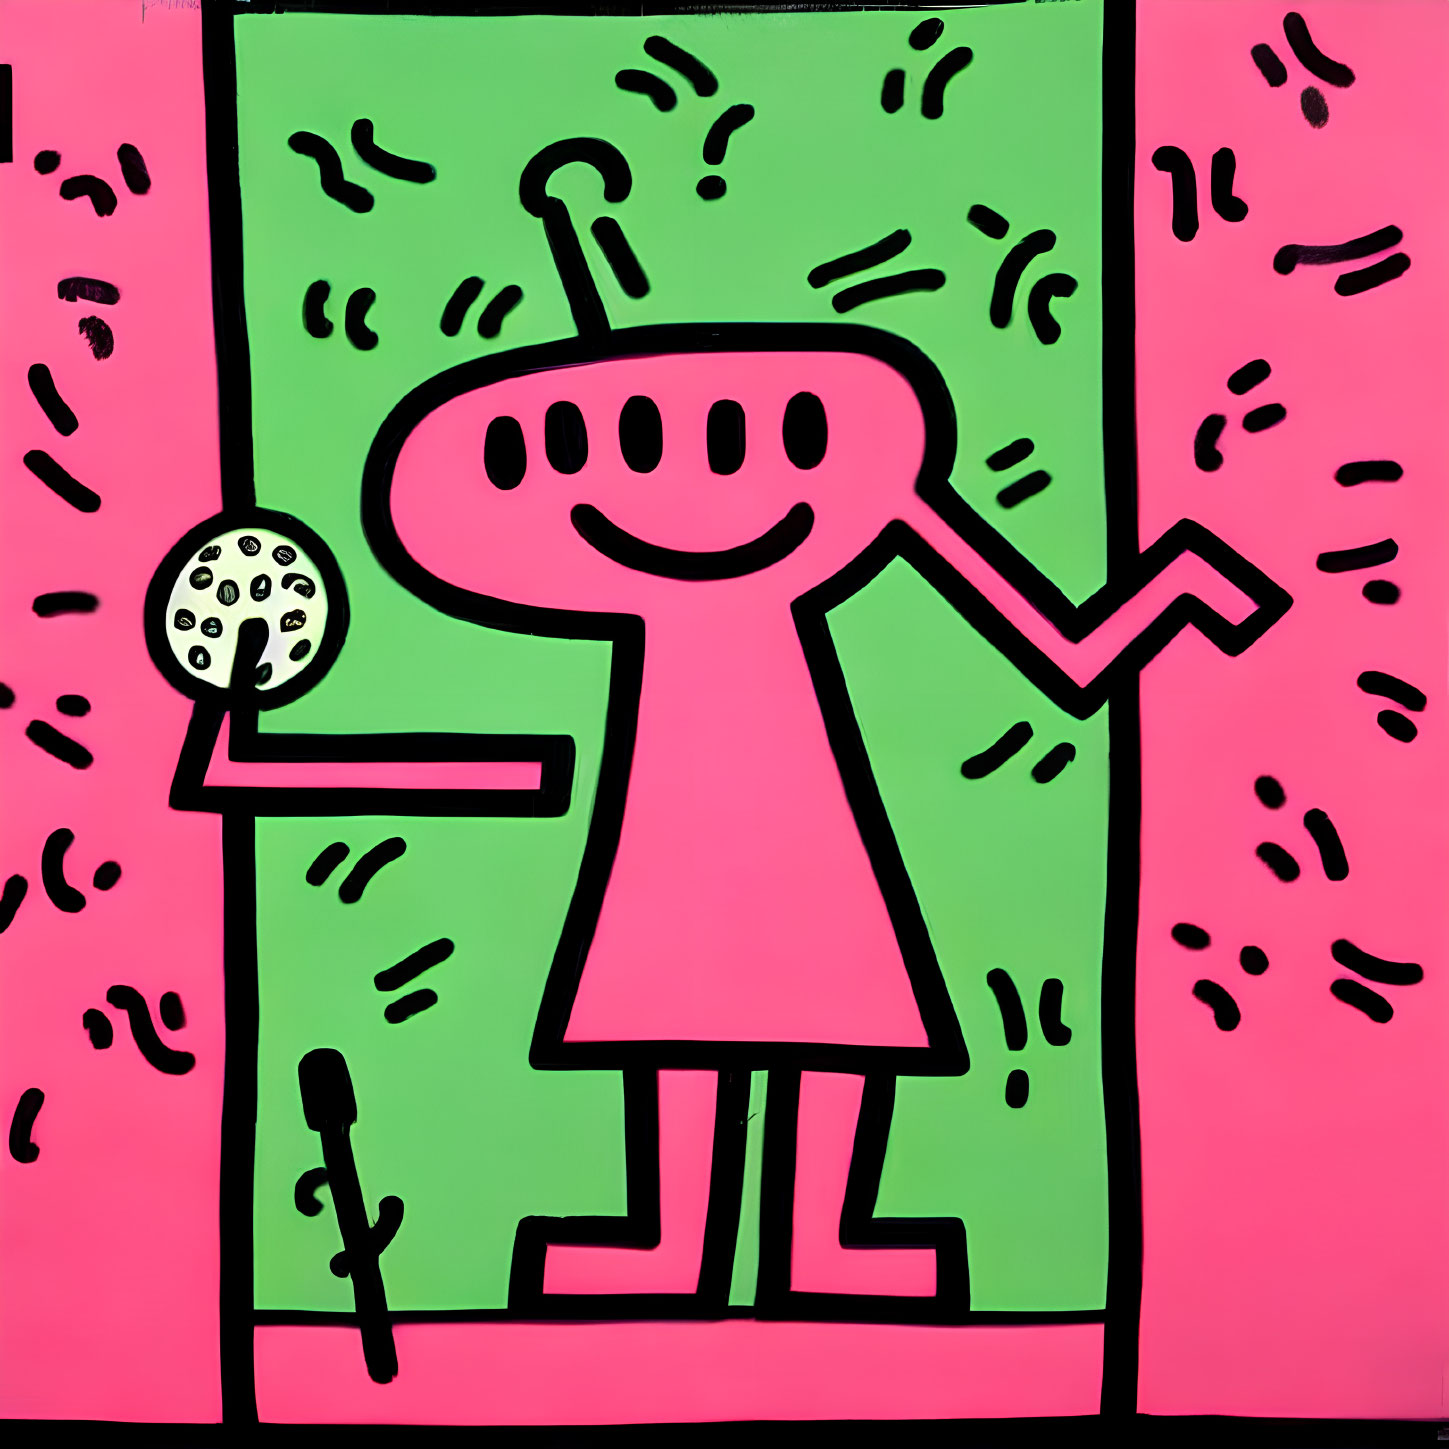 Colorful Pop Art Painting: Cartoon Figure in Pink with Microphone on Green Background